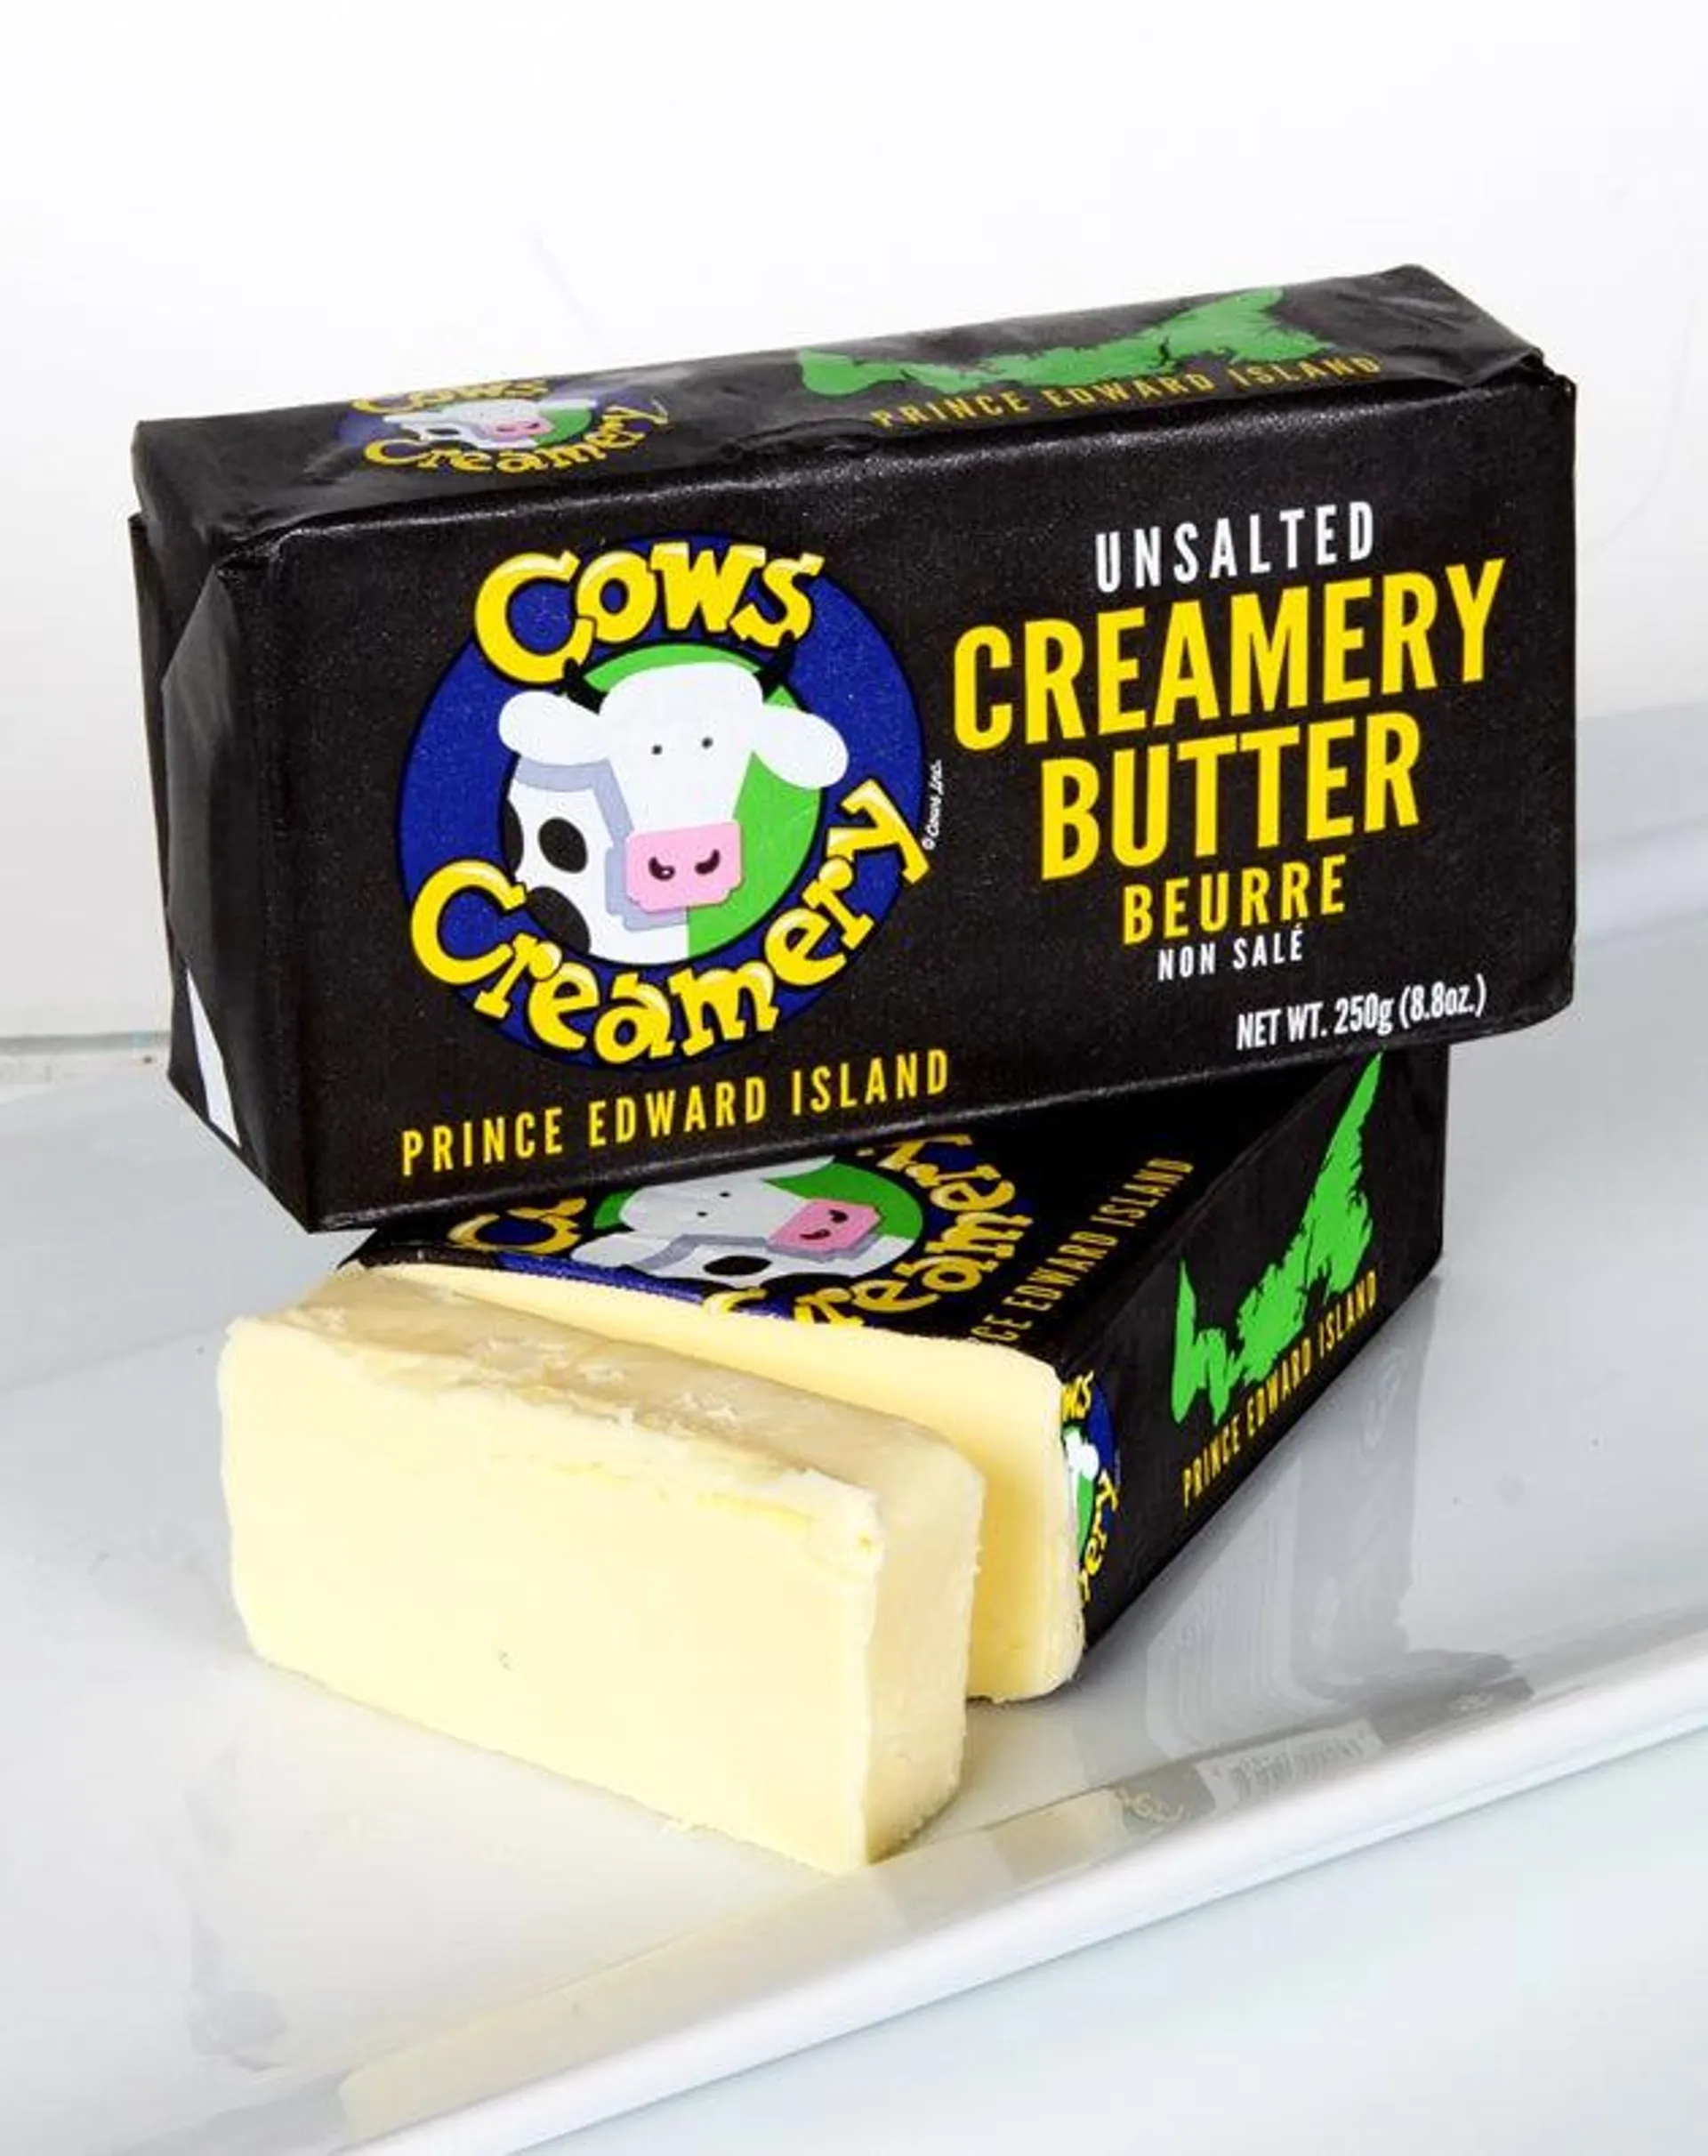 Cows Creamery Unsalted Butter - 250 g